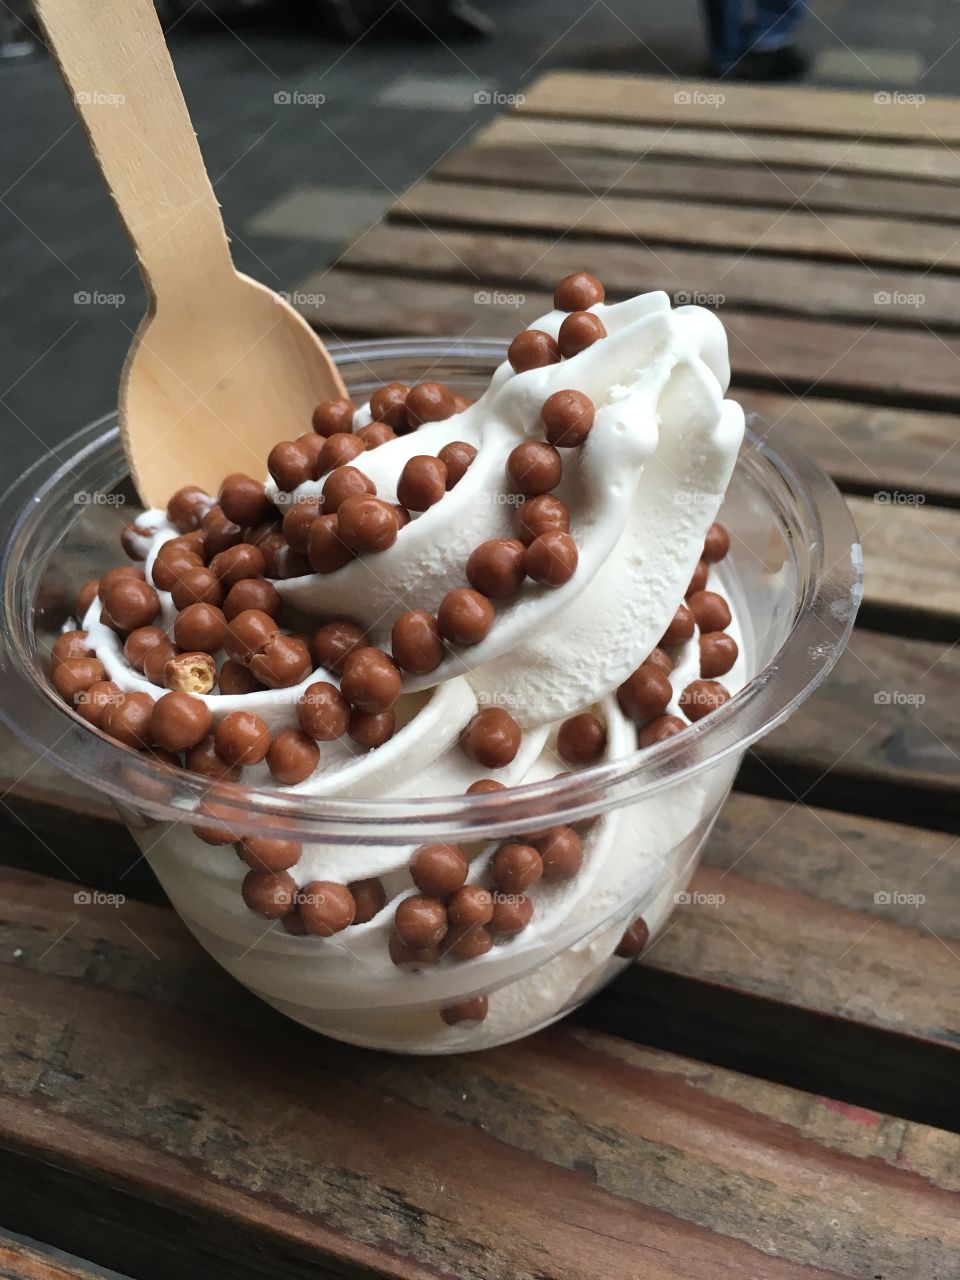 A vanilla soft serve ice cream in a plastic cup with little chocolate candies as a topping. On a wooden table with a wooden spoon 